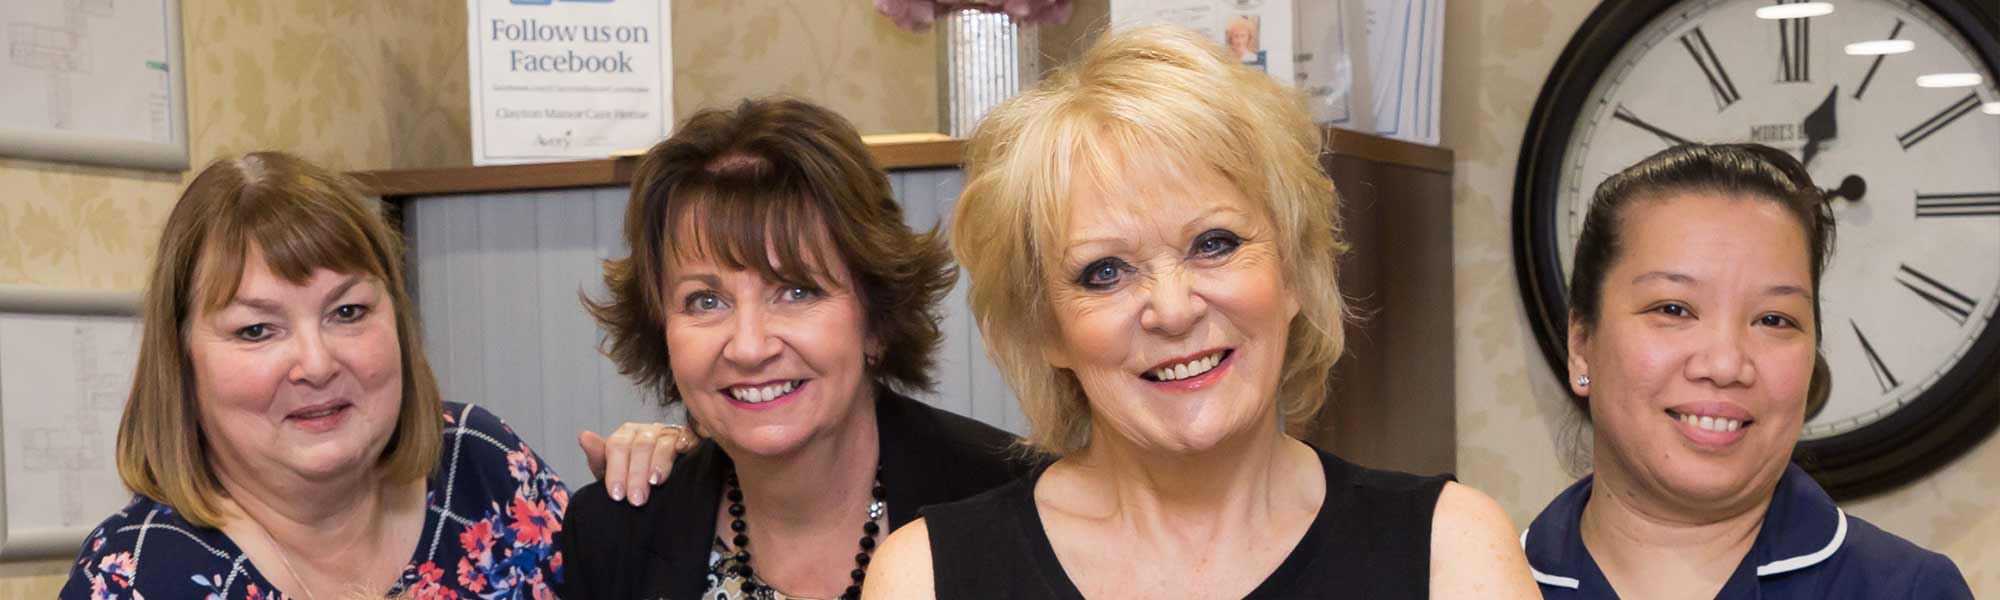 Clayton Manor Care Home Sherrie Hewson Visit Avery Healthcare Staff Smile clock